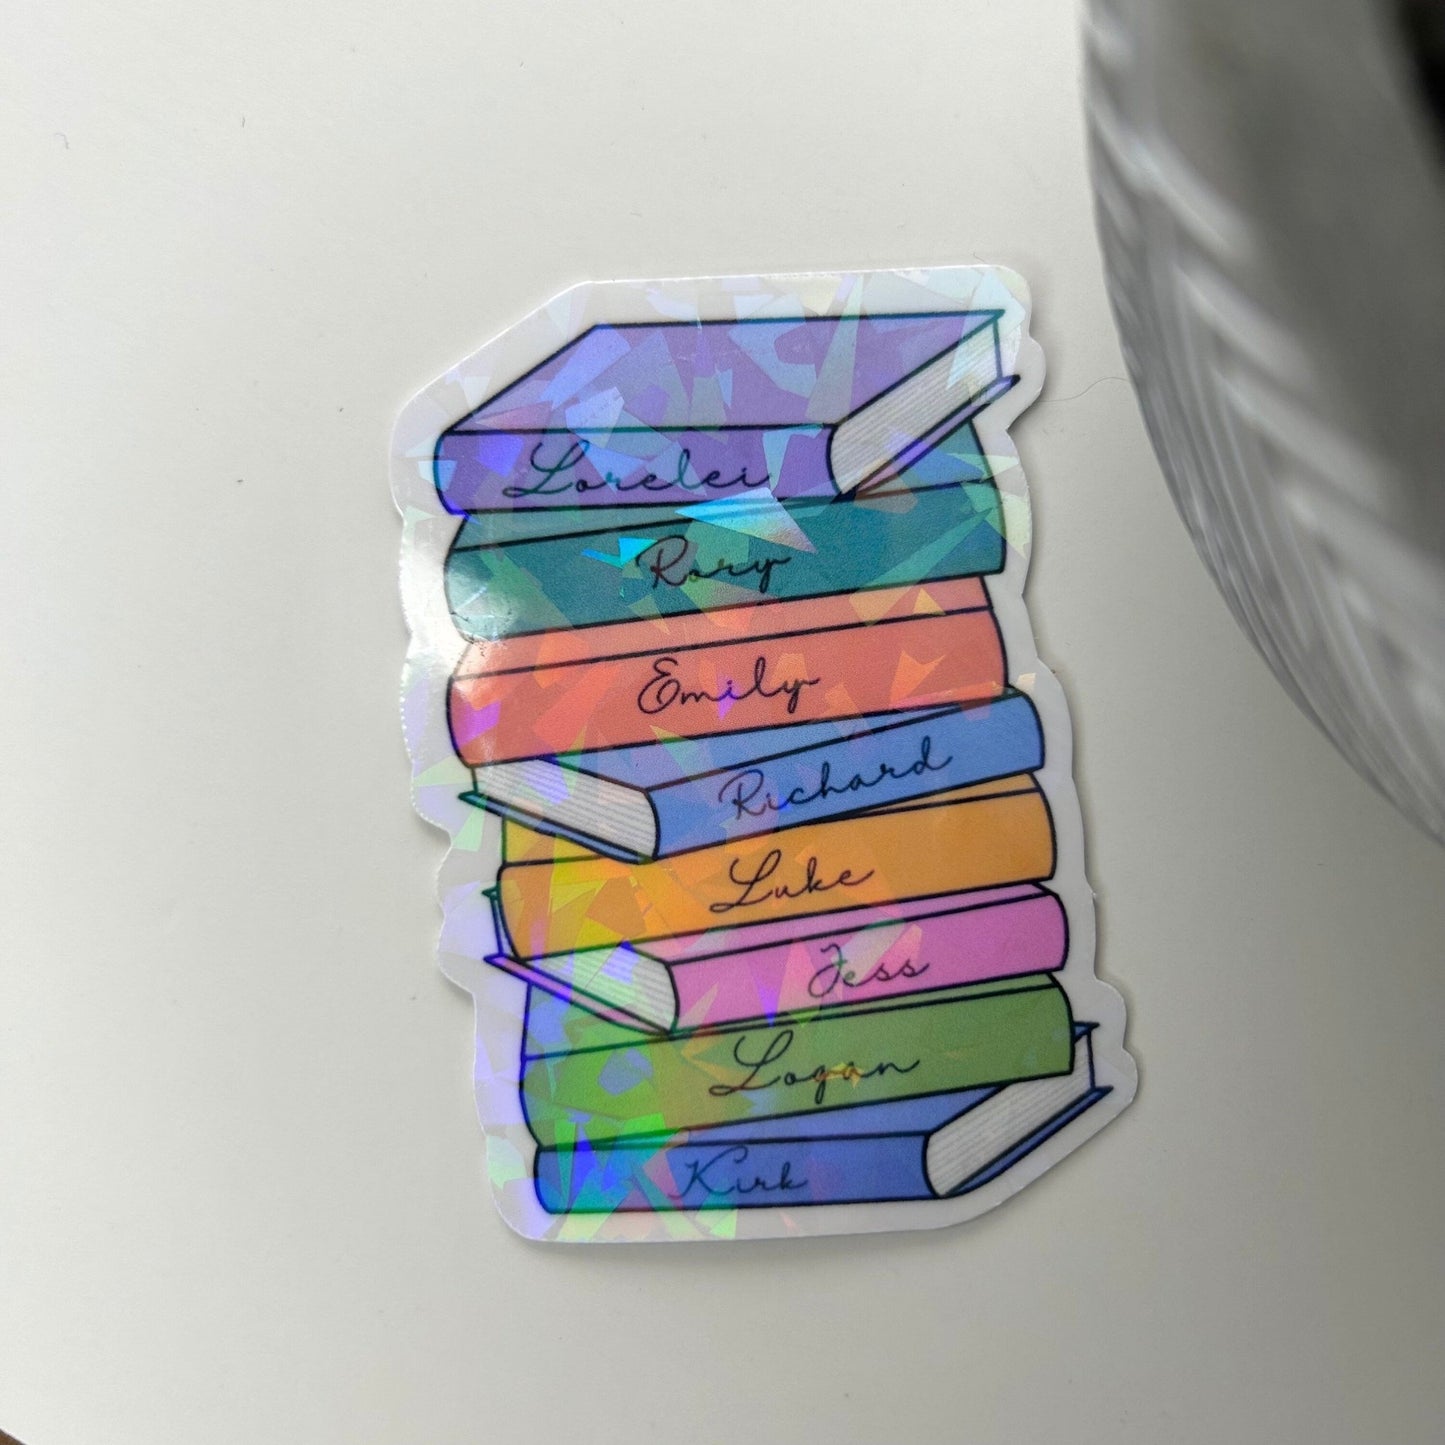 Gilmore Girls Book Stack Sticker - Awfullynerdy.co